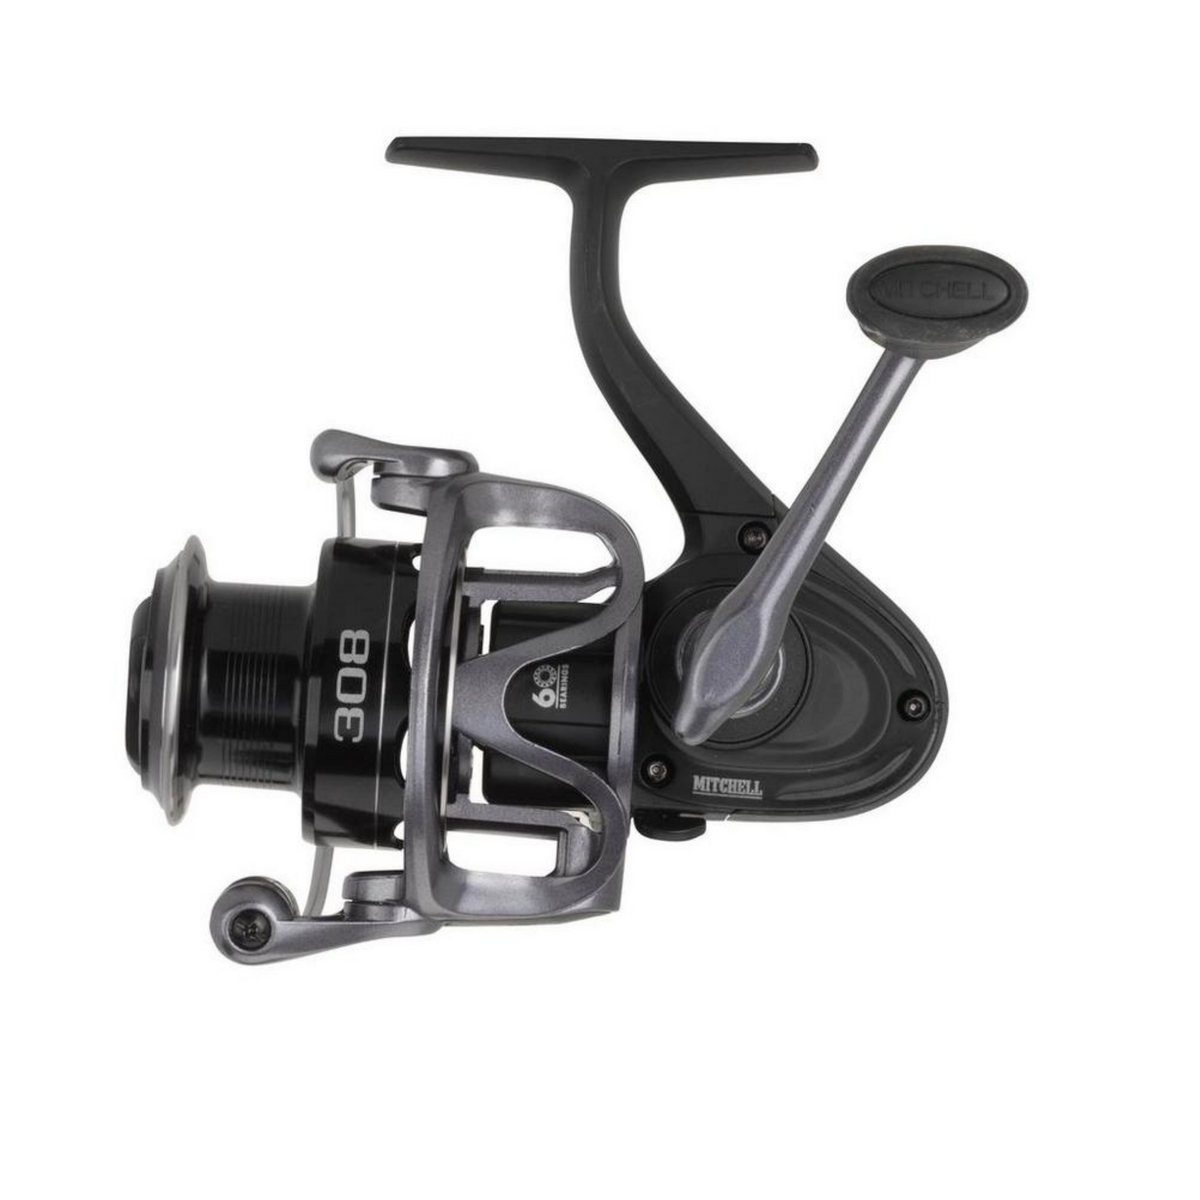 Mitchell 300 Coarse Fishing Reel - Classic Performance for Every